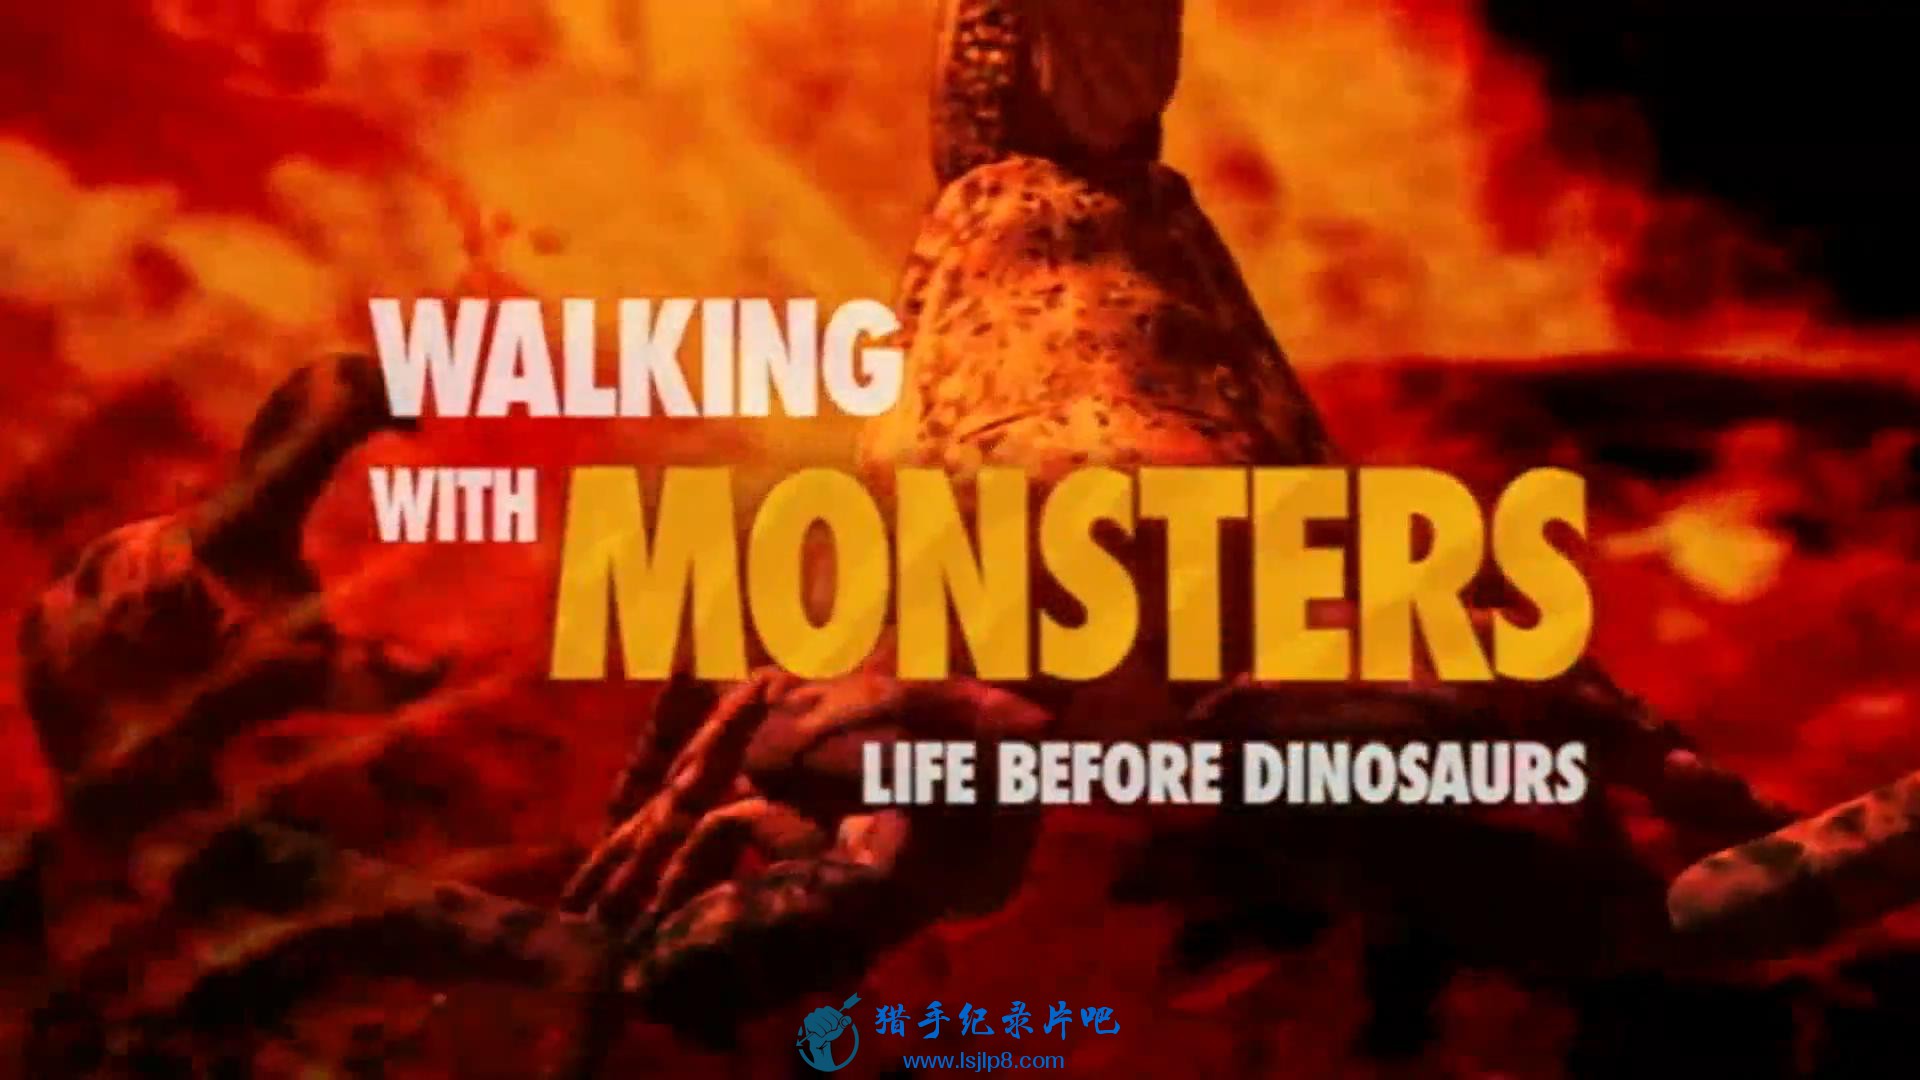 Walking.With.Monsters.Life.Before.Dinosaurs.1of3.1080p.HDTV.x264.AAC_20180429105112.JPG